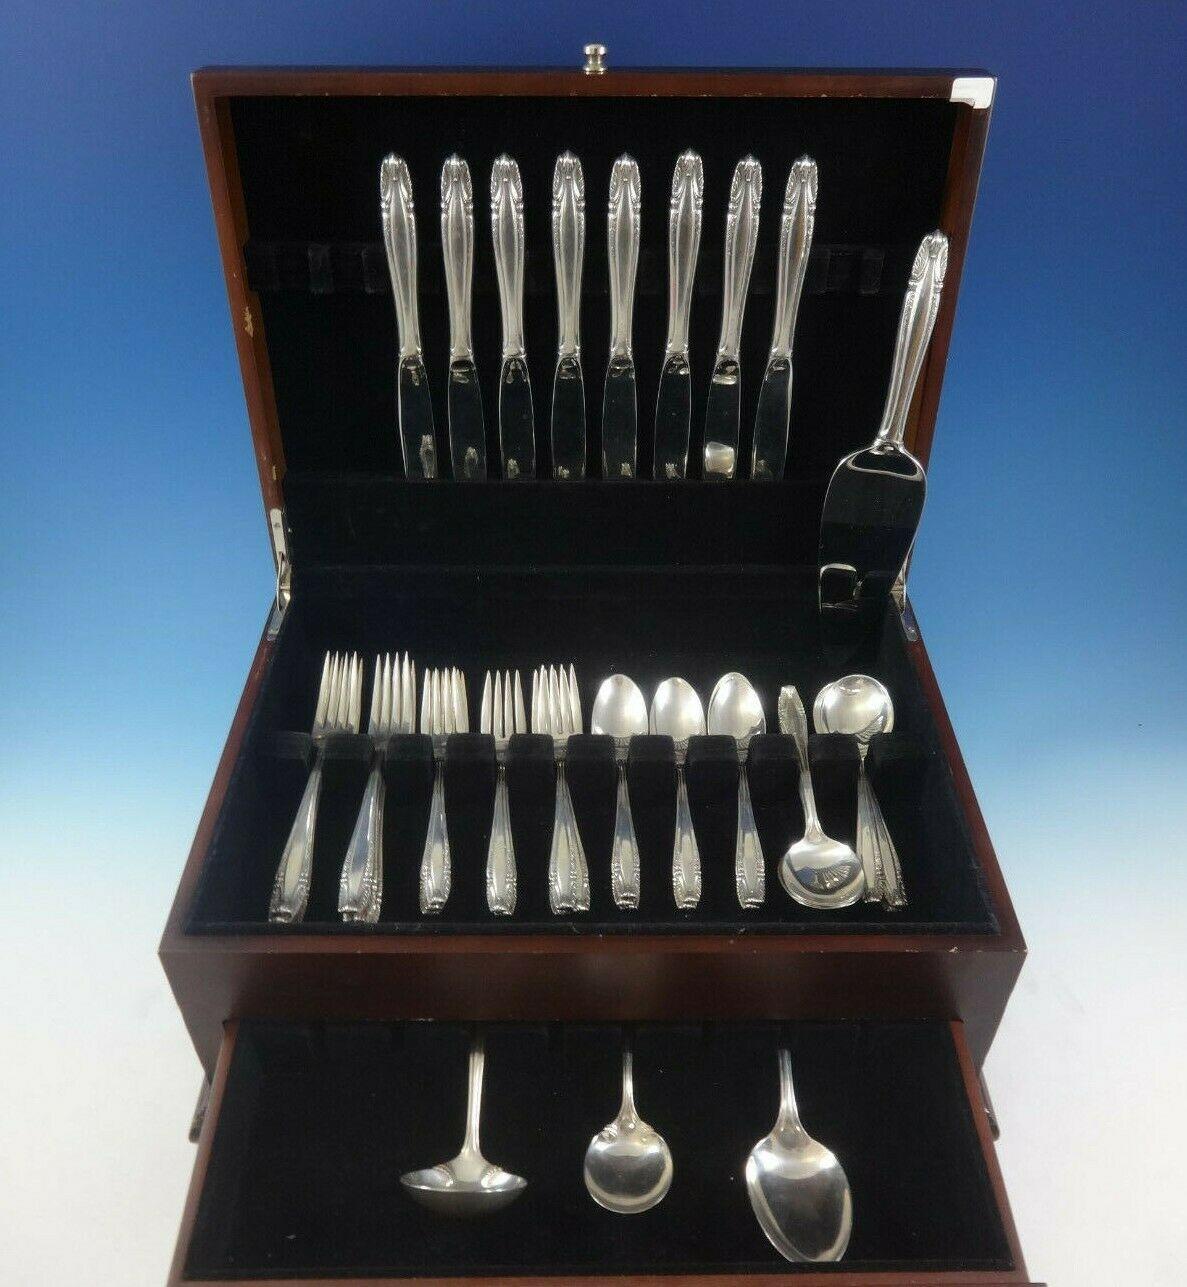 Stradivari by Wallace sterling silver flatware set, 44 pieces. This set includes:

8 knives, 9 1/8